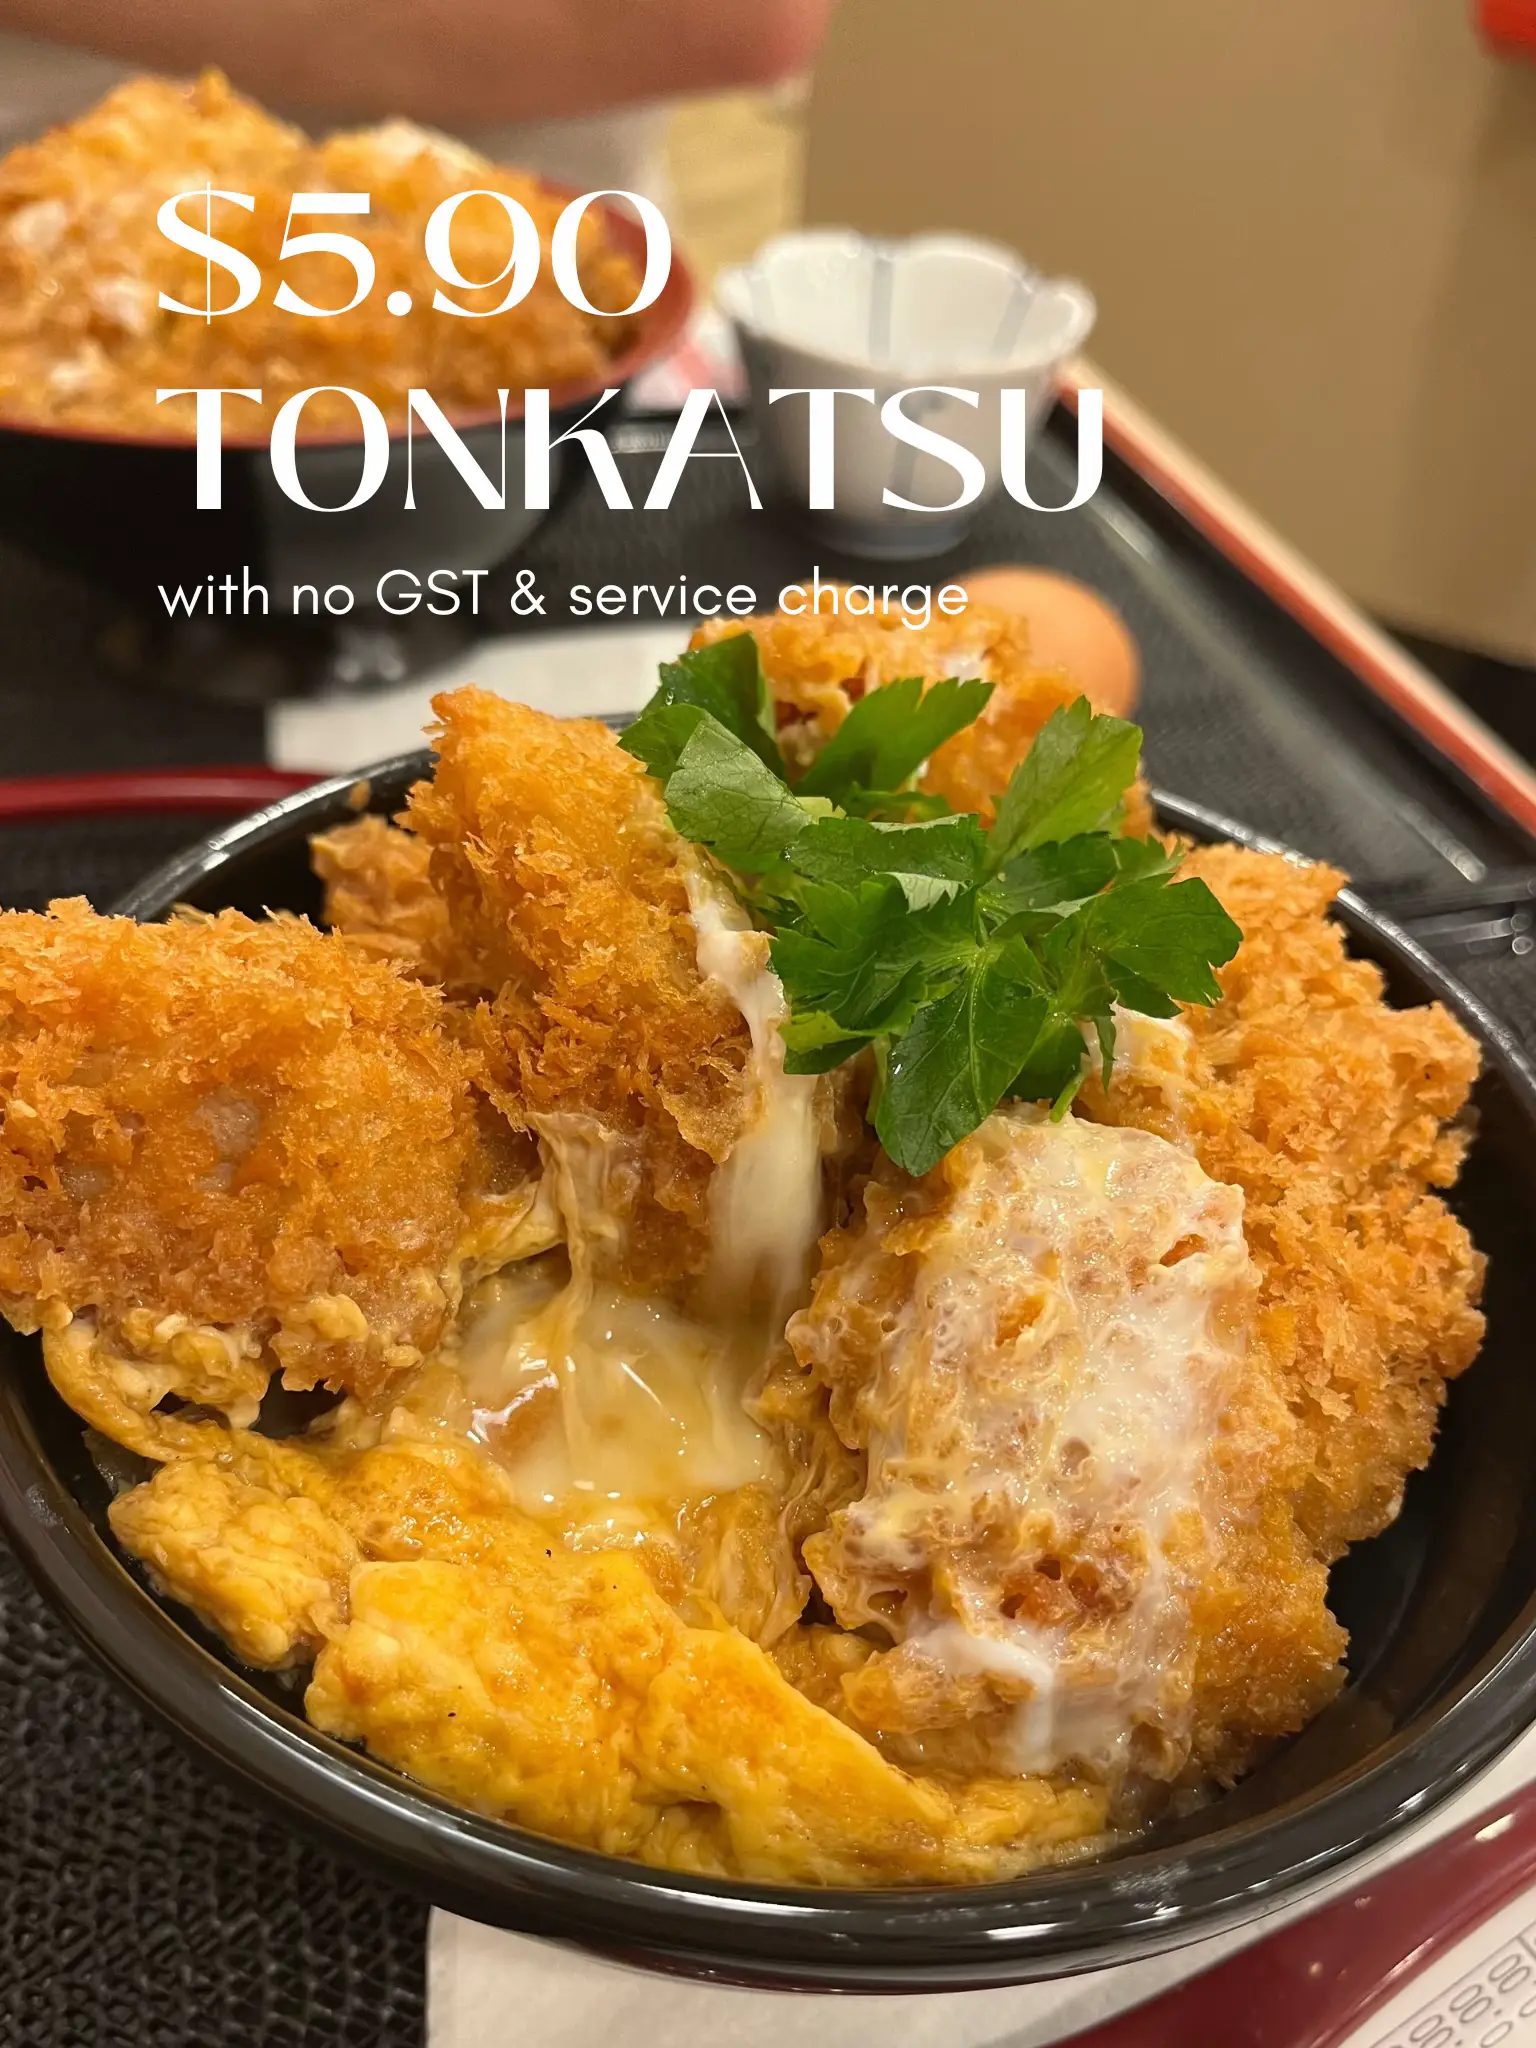 i can’t believe this tonkatsu is only $5.90… 😭😋🥹's images